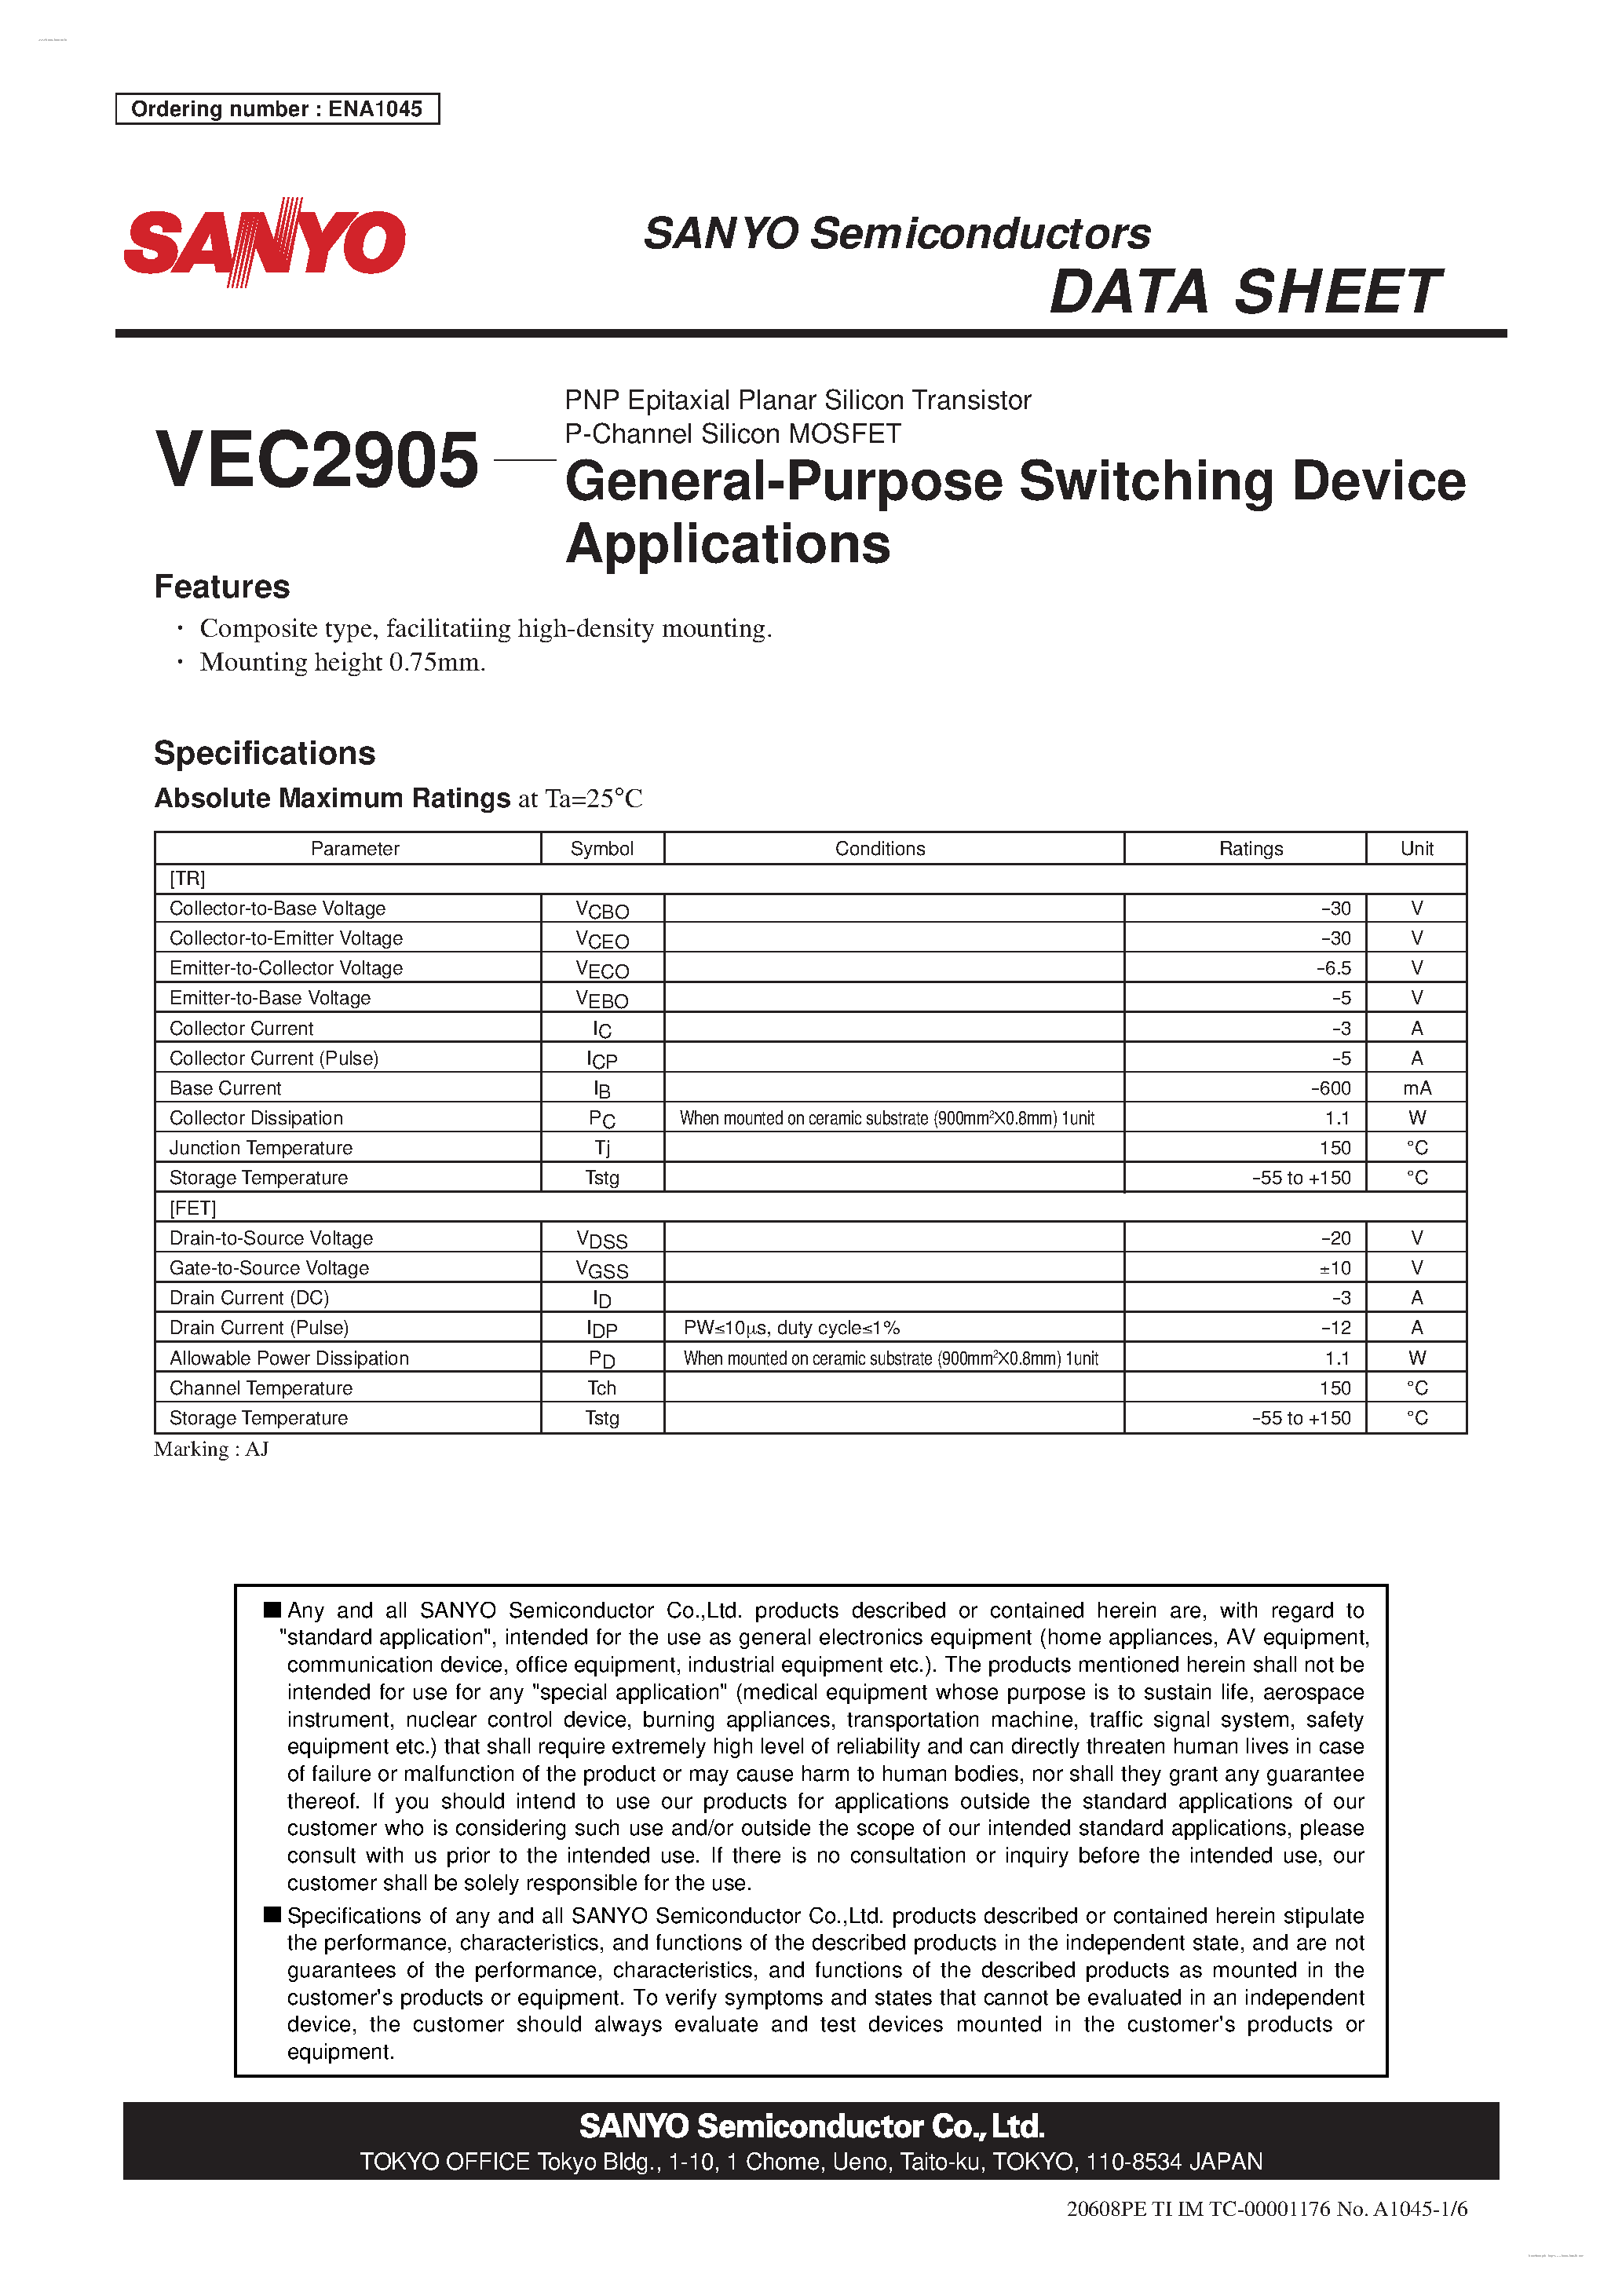 Datasheet VEC2905 - P-Channel Silicon MOSFET page 1